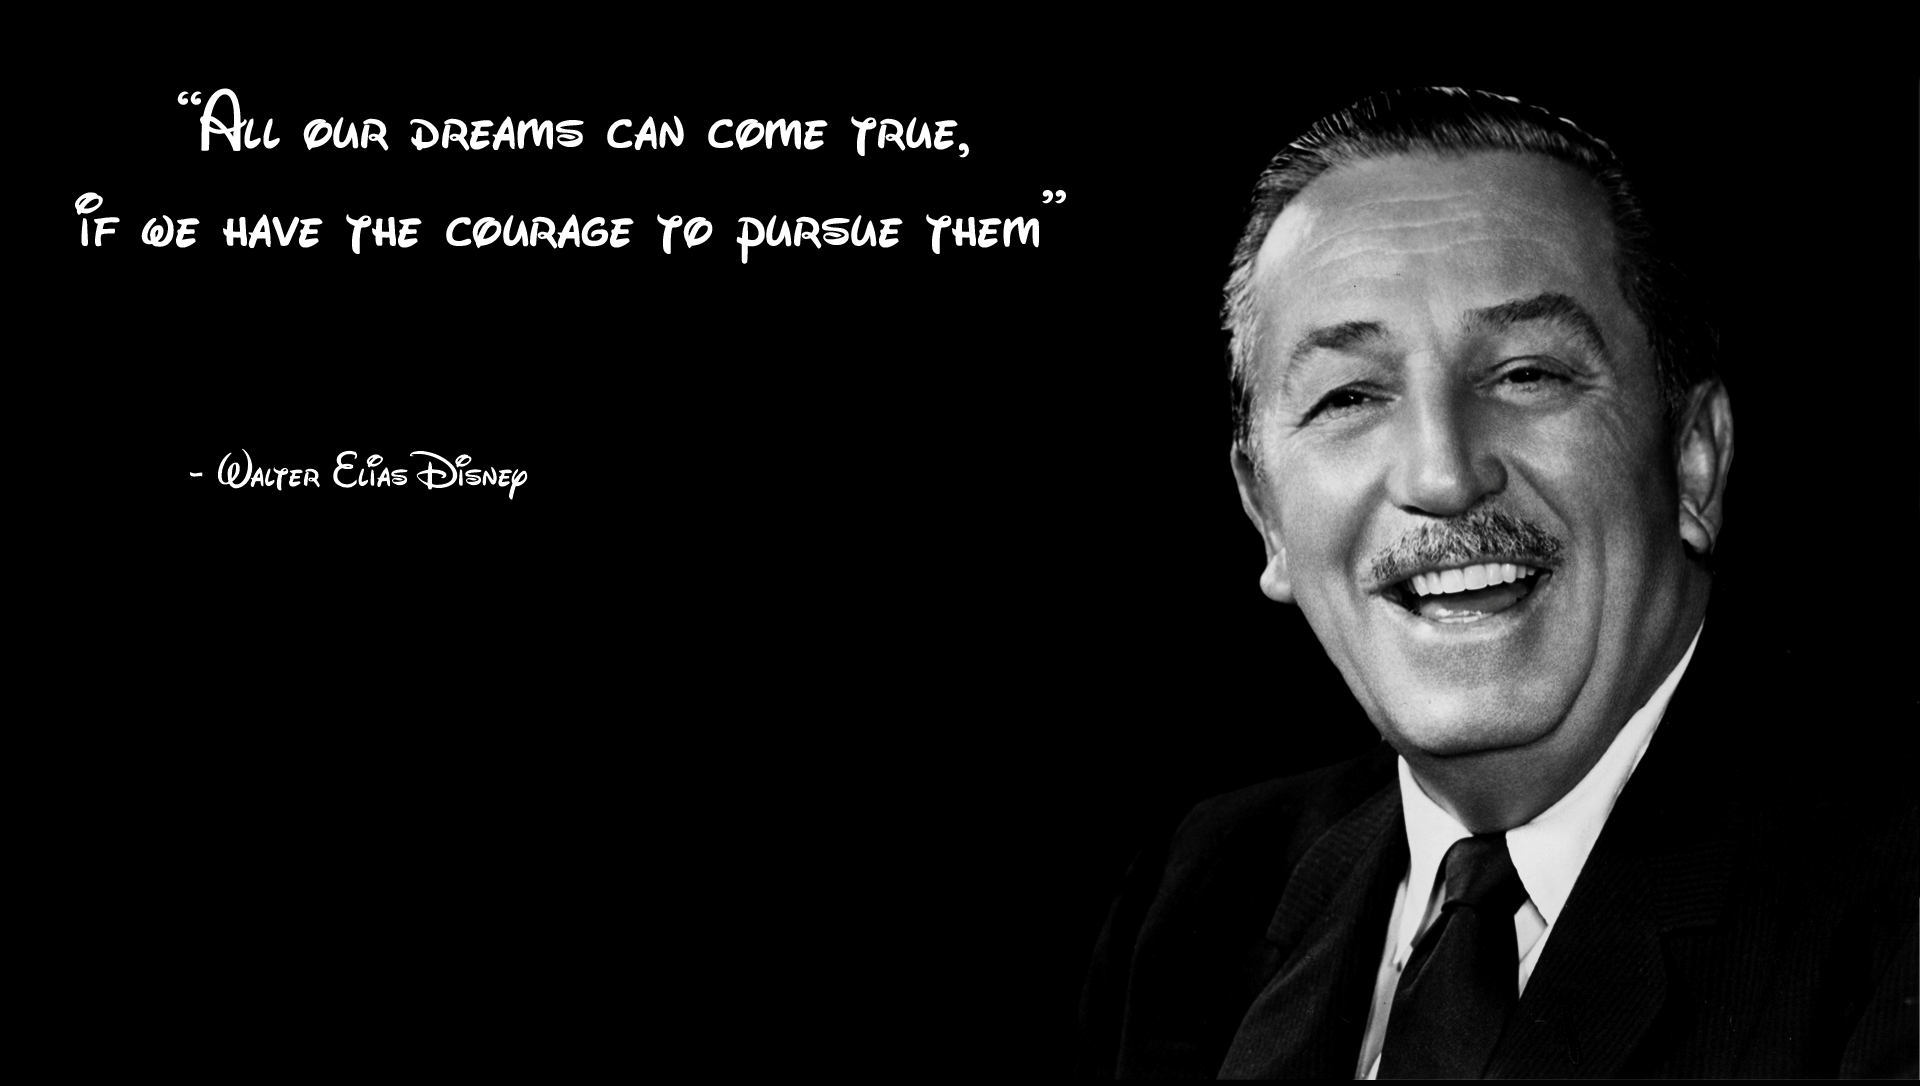 famous-quotes-by-walt-disneyall-our-dreams-walt-disney-quotes-pics-1